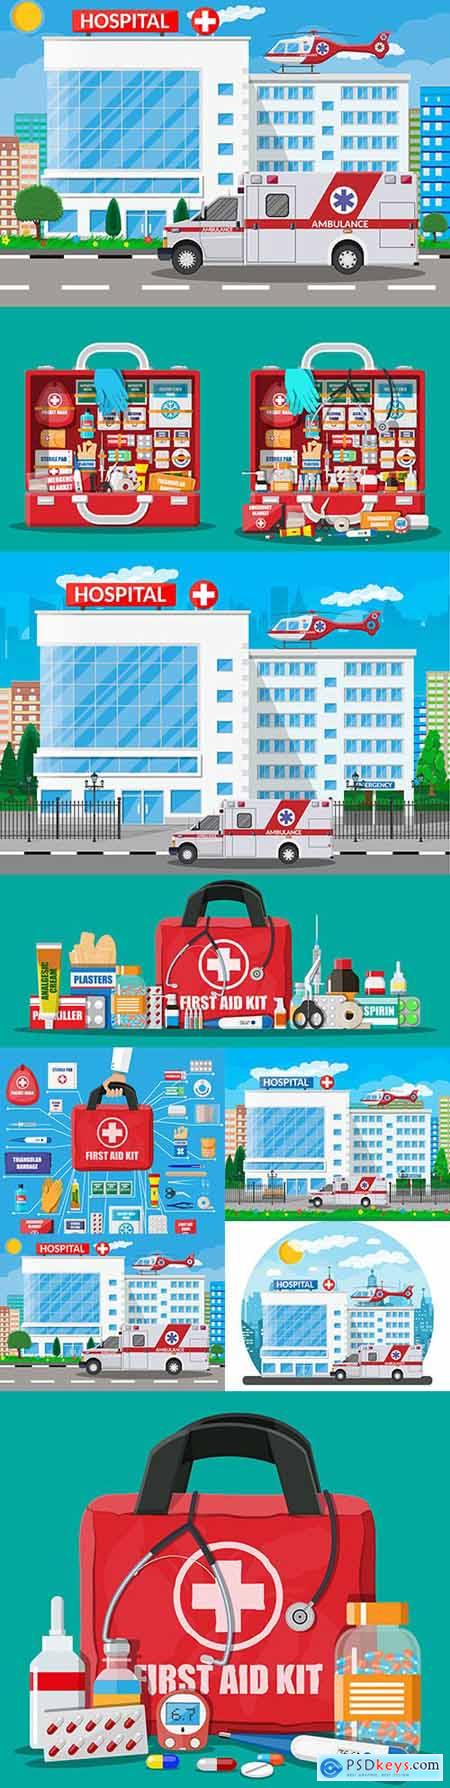 Hospital with ambulance and medical suitcase with tools